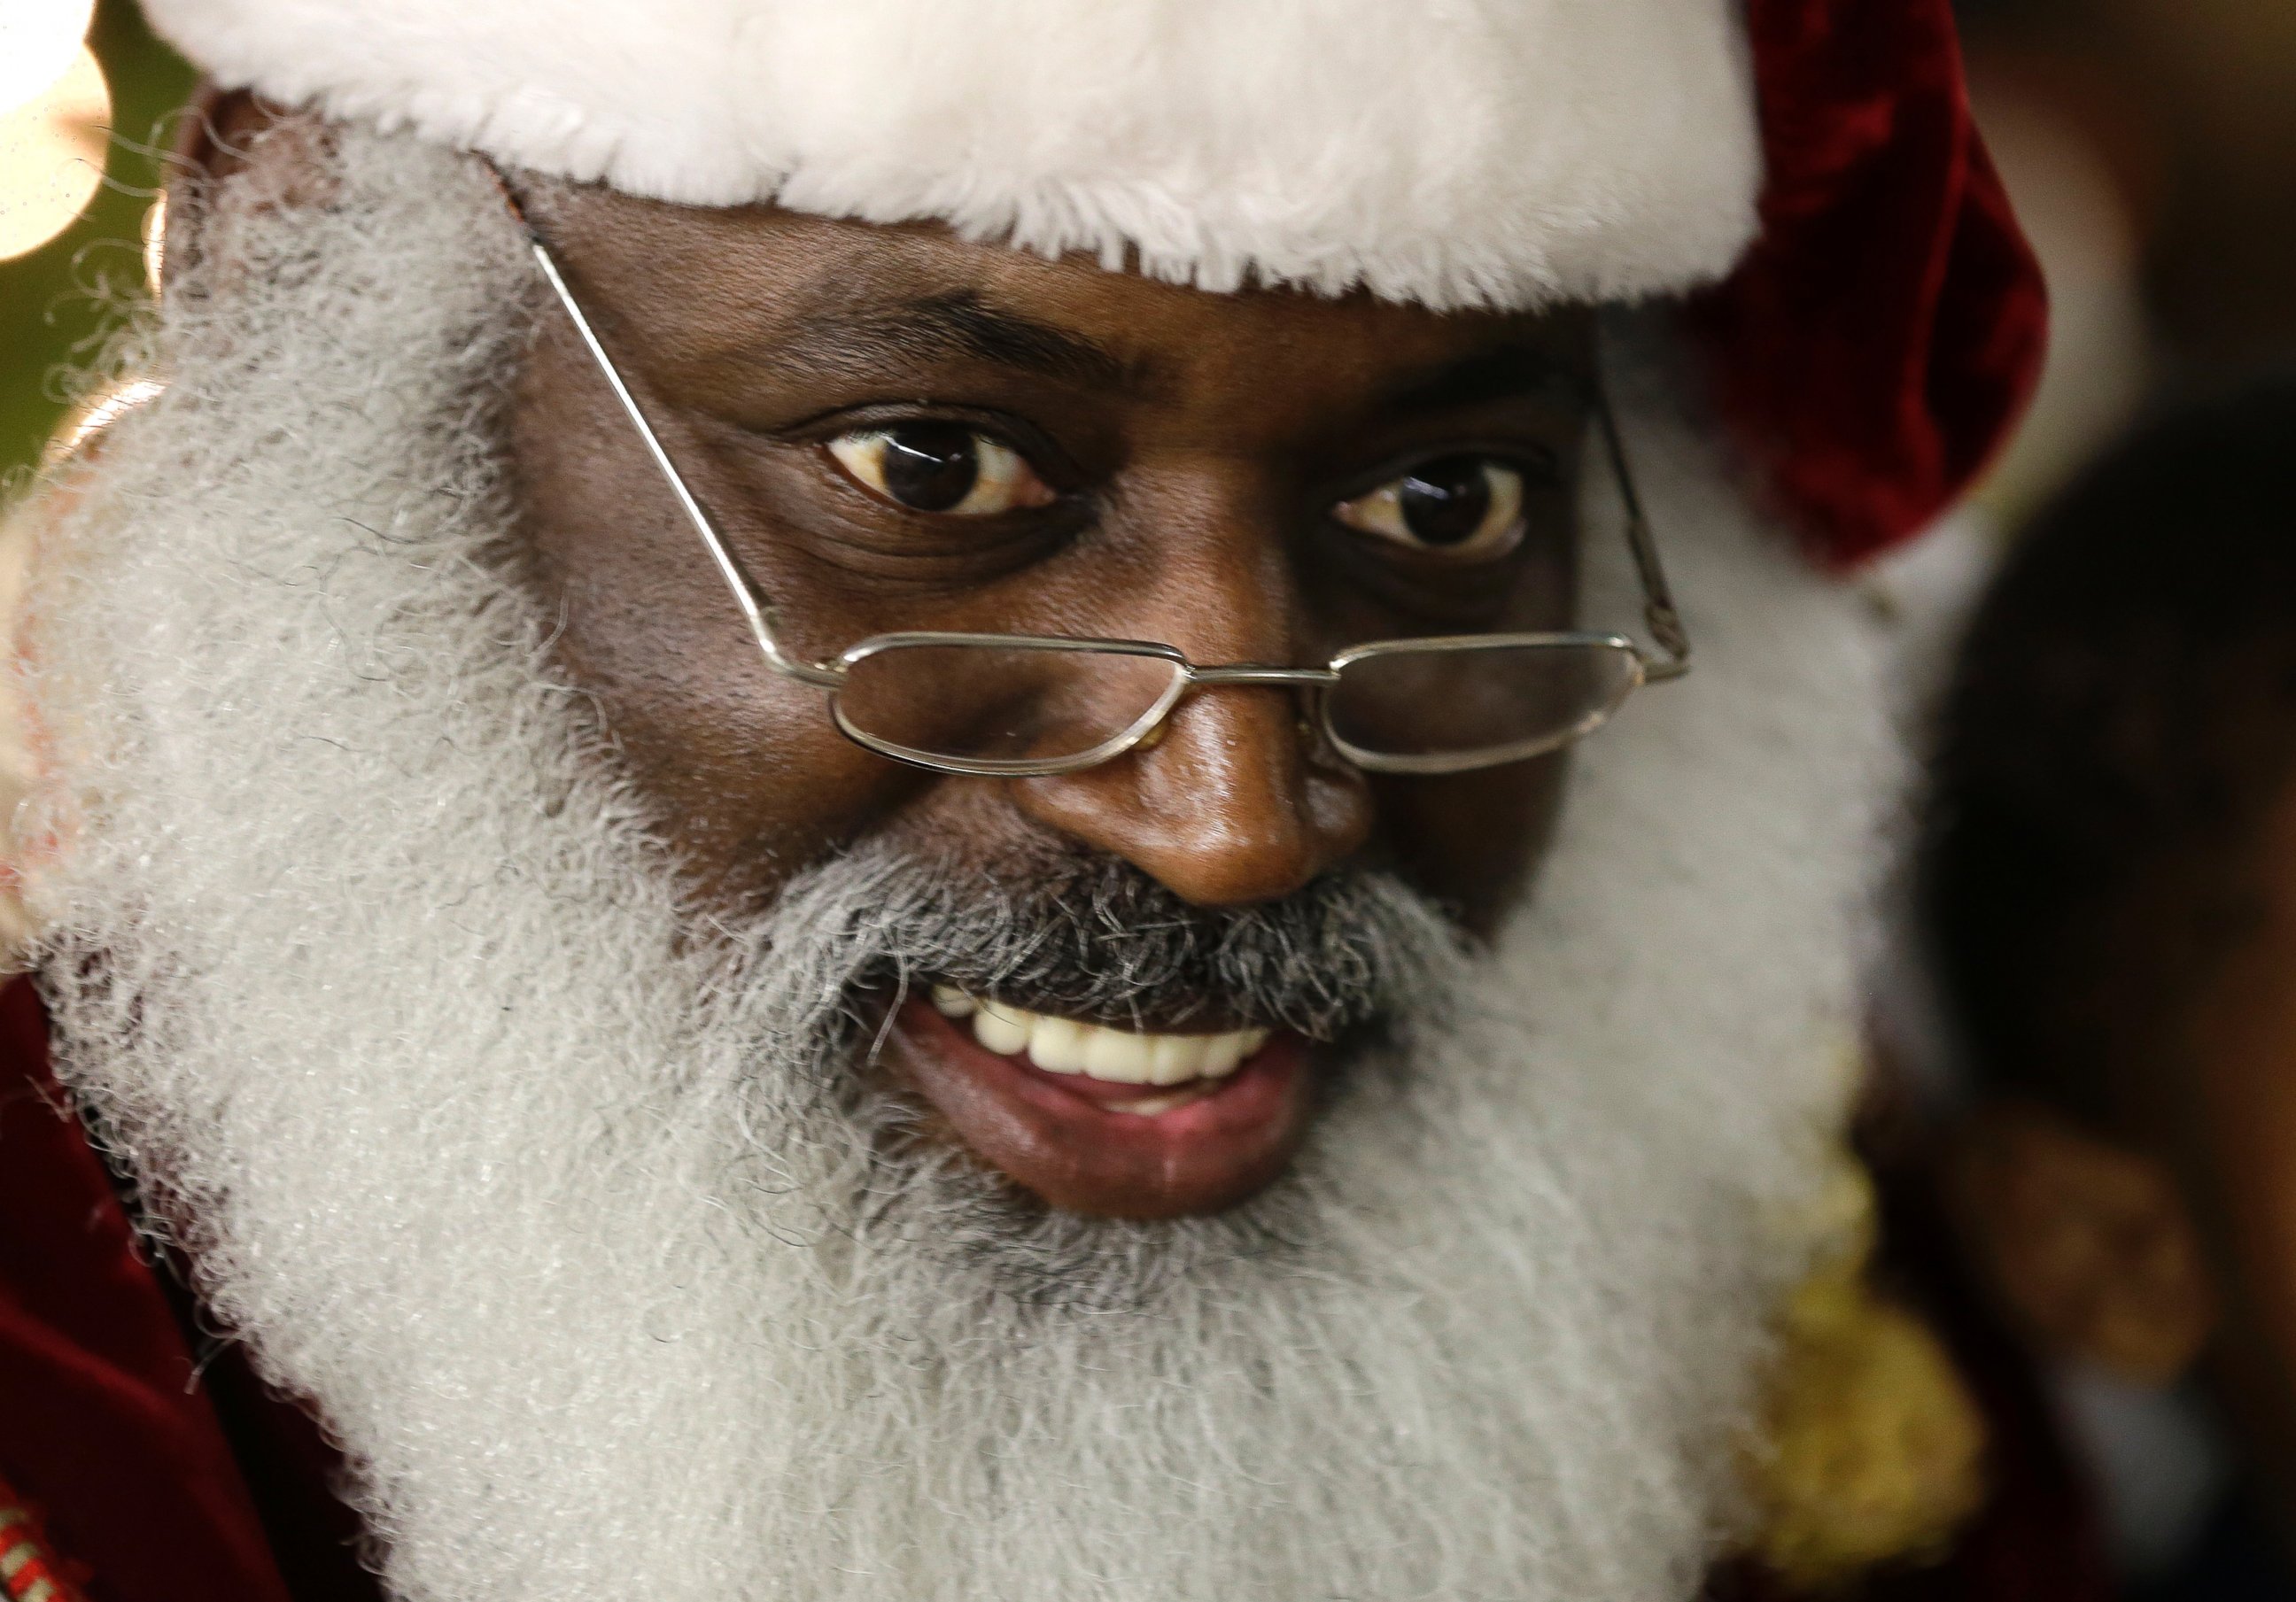 PHOTO: In this Dec. 17, 2013 photo, Dee Sinclair, portraying Santa Claus, reads a story to children in Atlanta. "Kids don't see color. They see a fat guy in a red suit giving toys," says Sinclair.